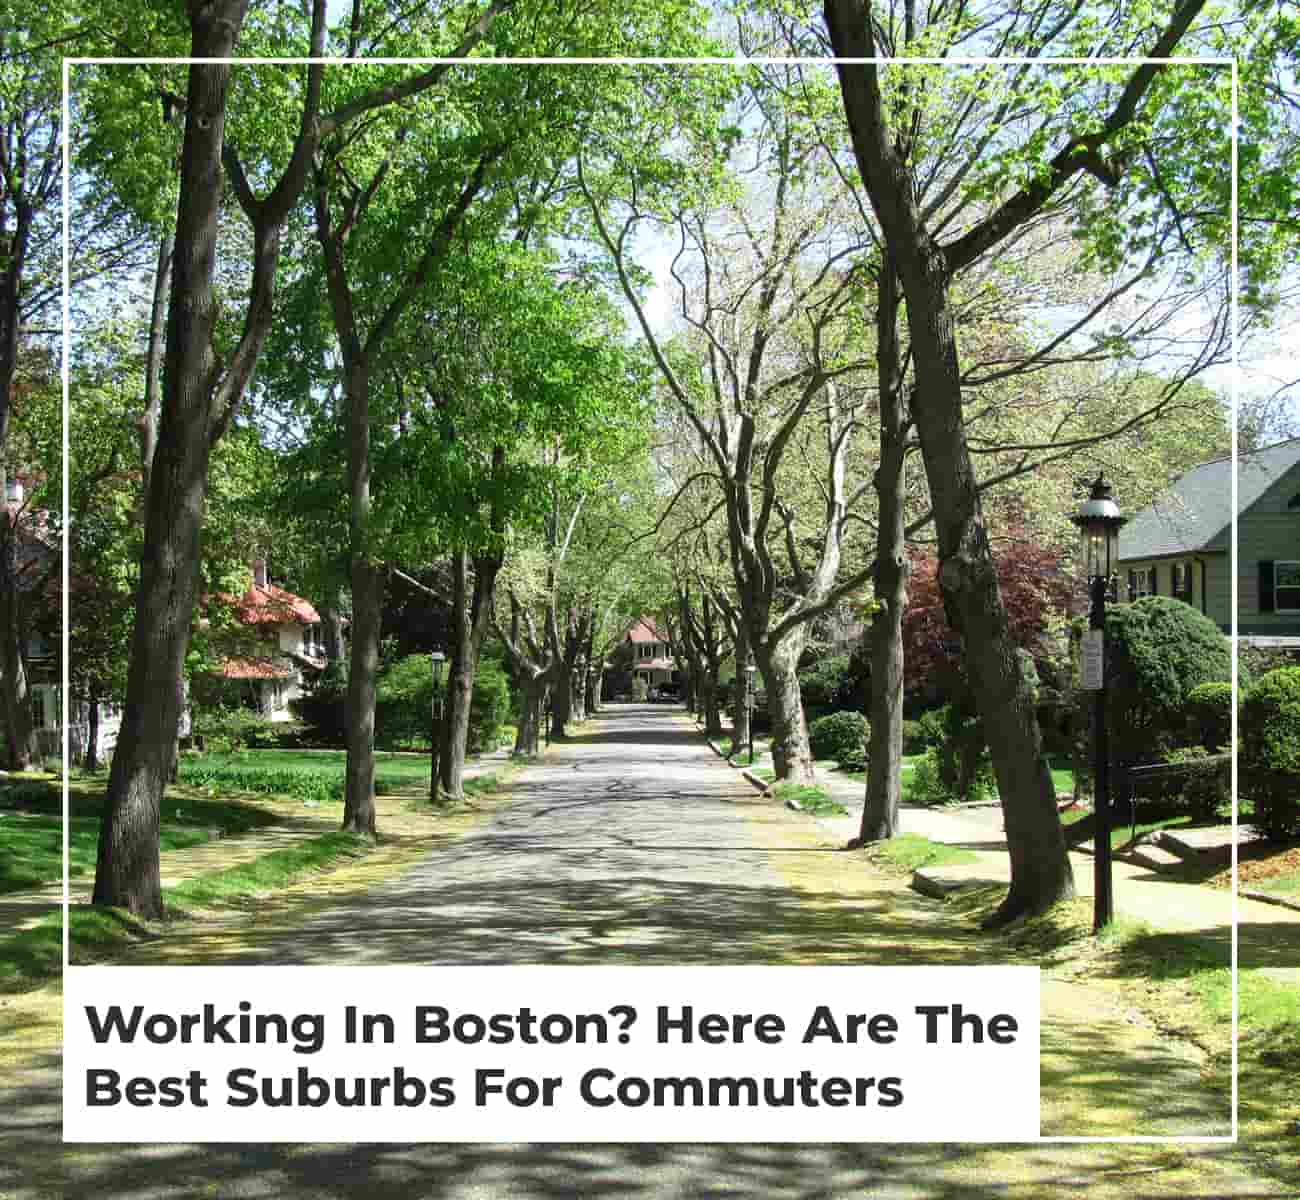 Working In Boston? Here Are The Best Suburbs For Commuters